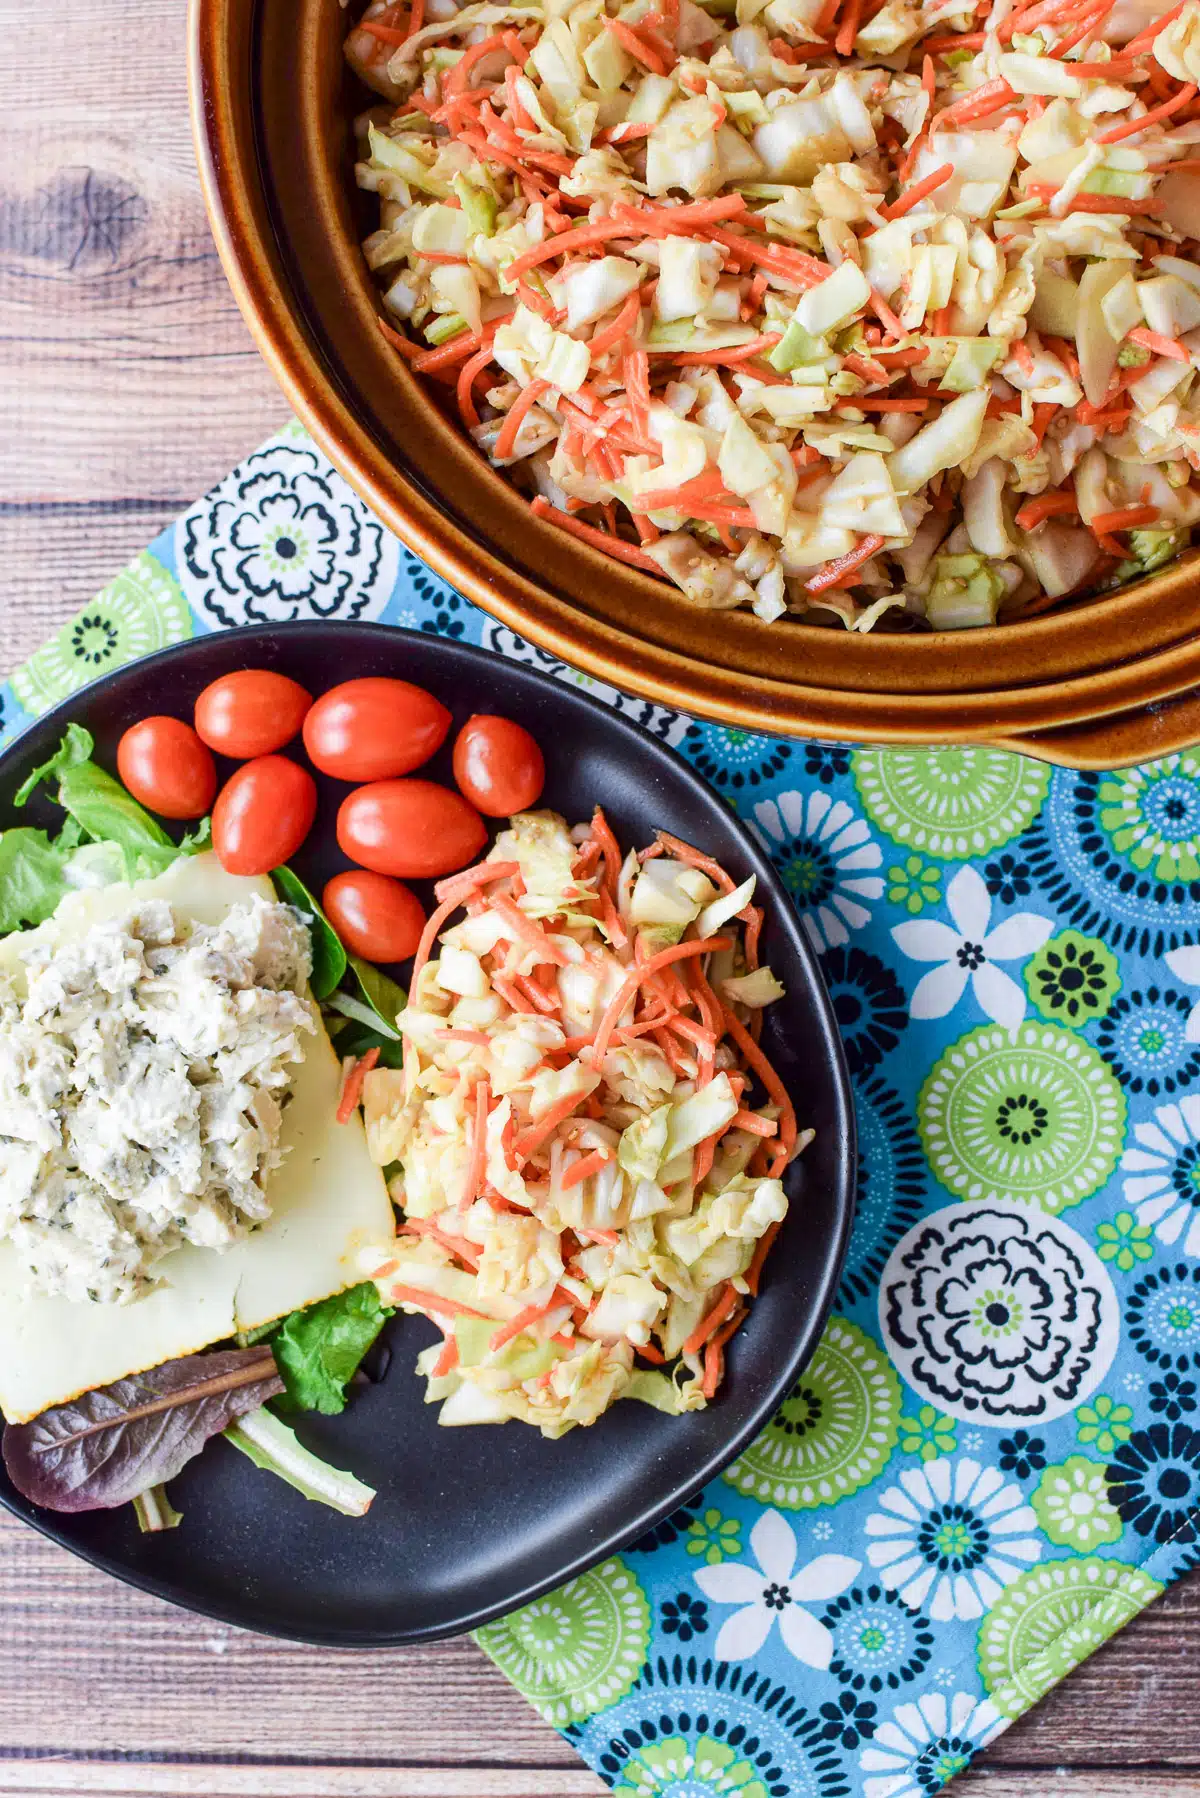 A black plate with slaw, tomatoes, lettuce and chicken salad